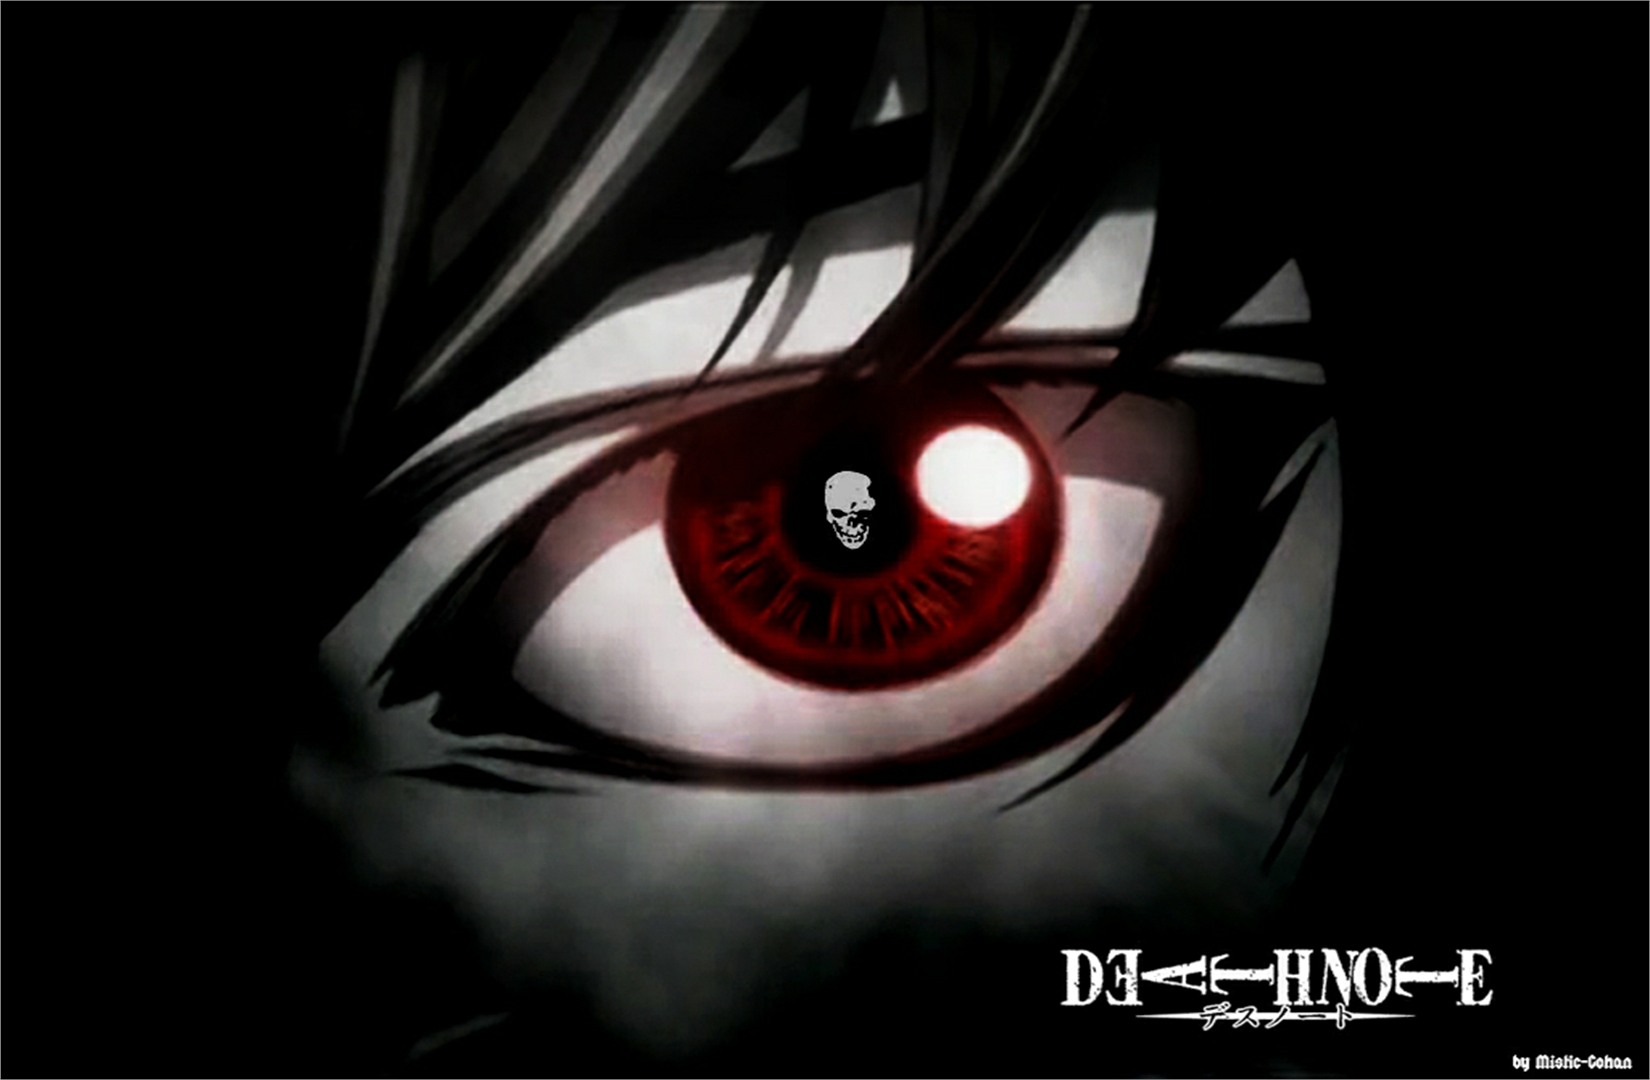 Anime character holding a Death Note, surrounded by dark ambiance